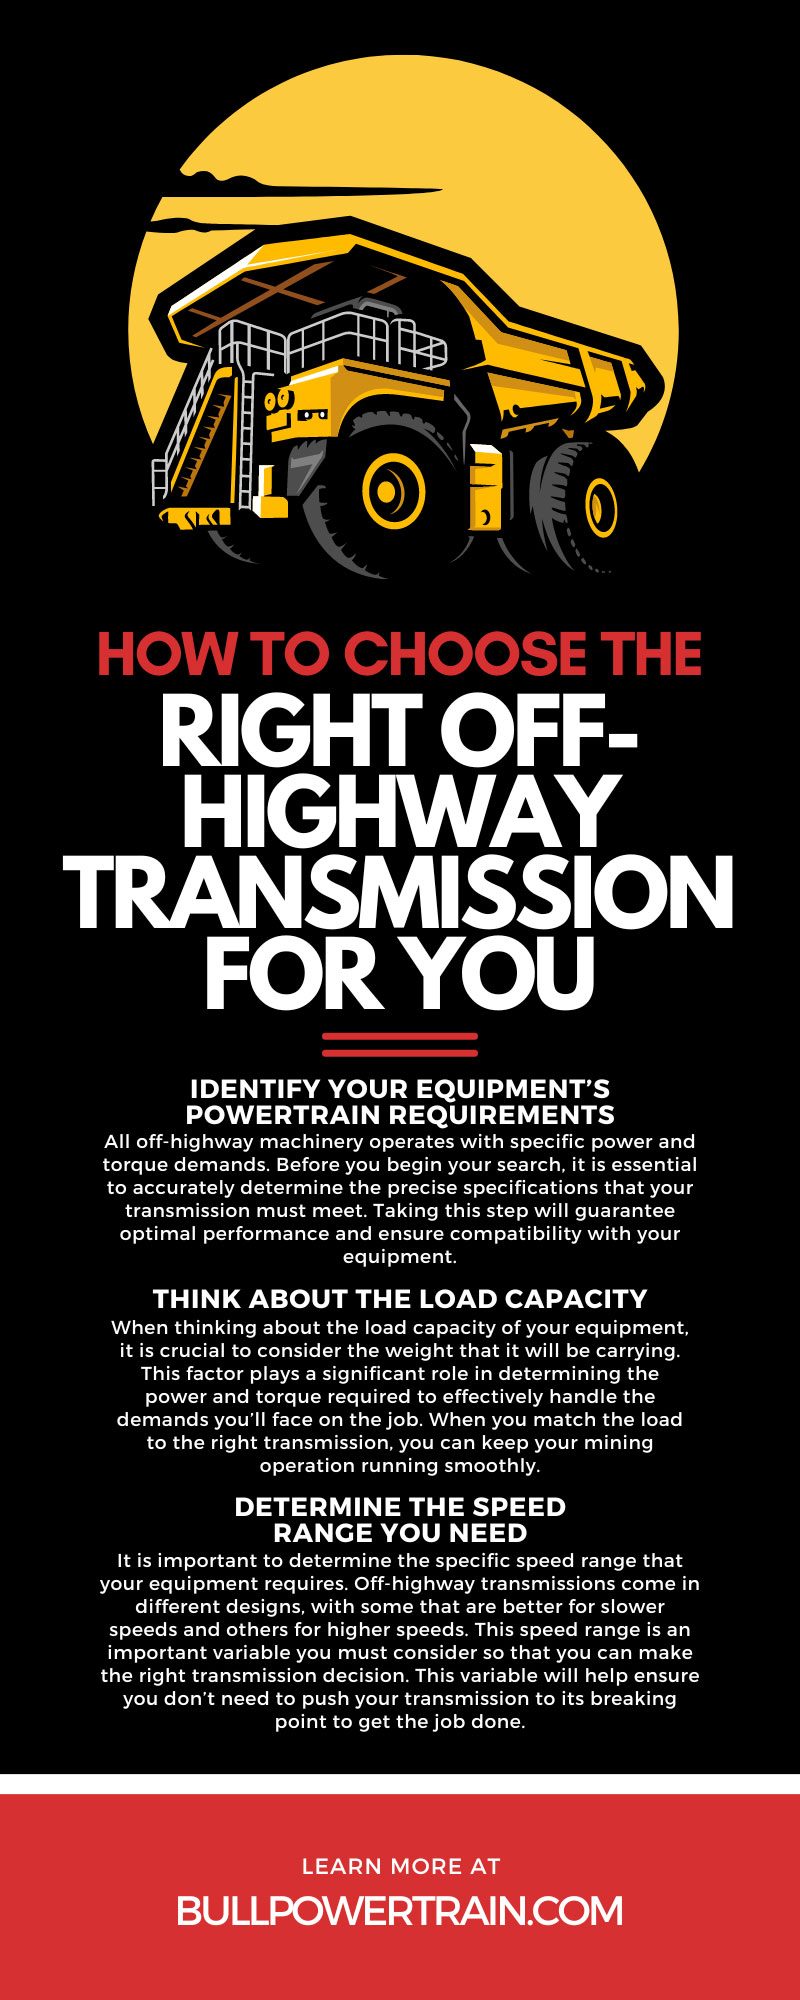 How To Choose the Right Off-Highway Transmission for You